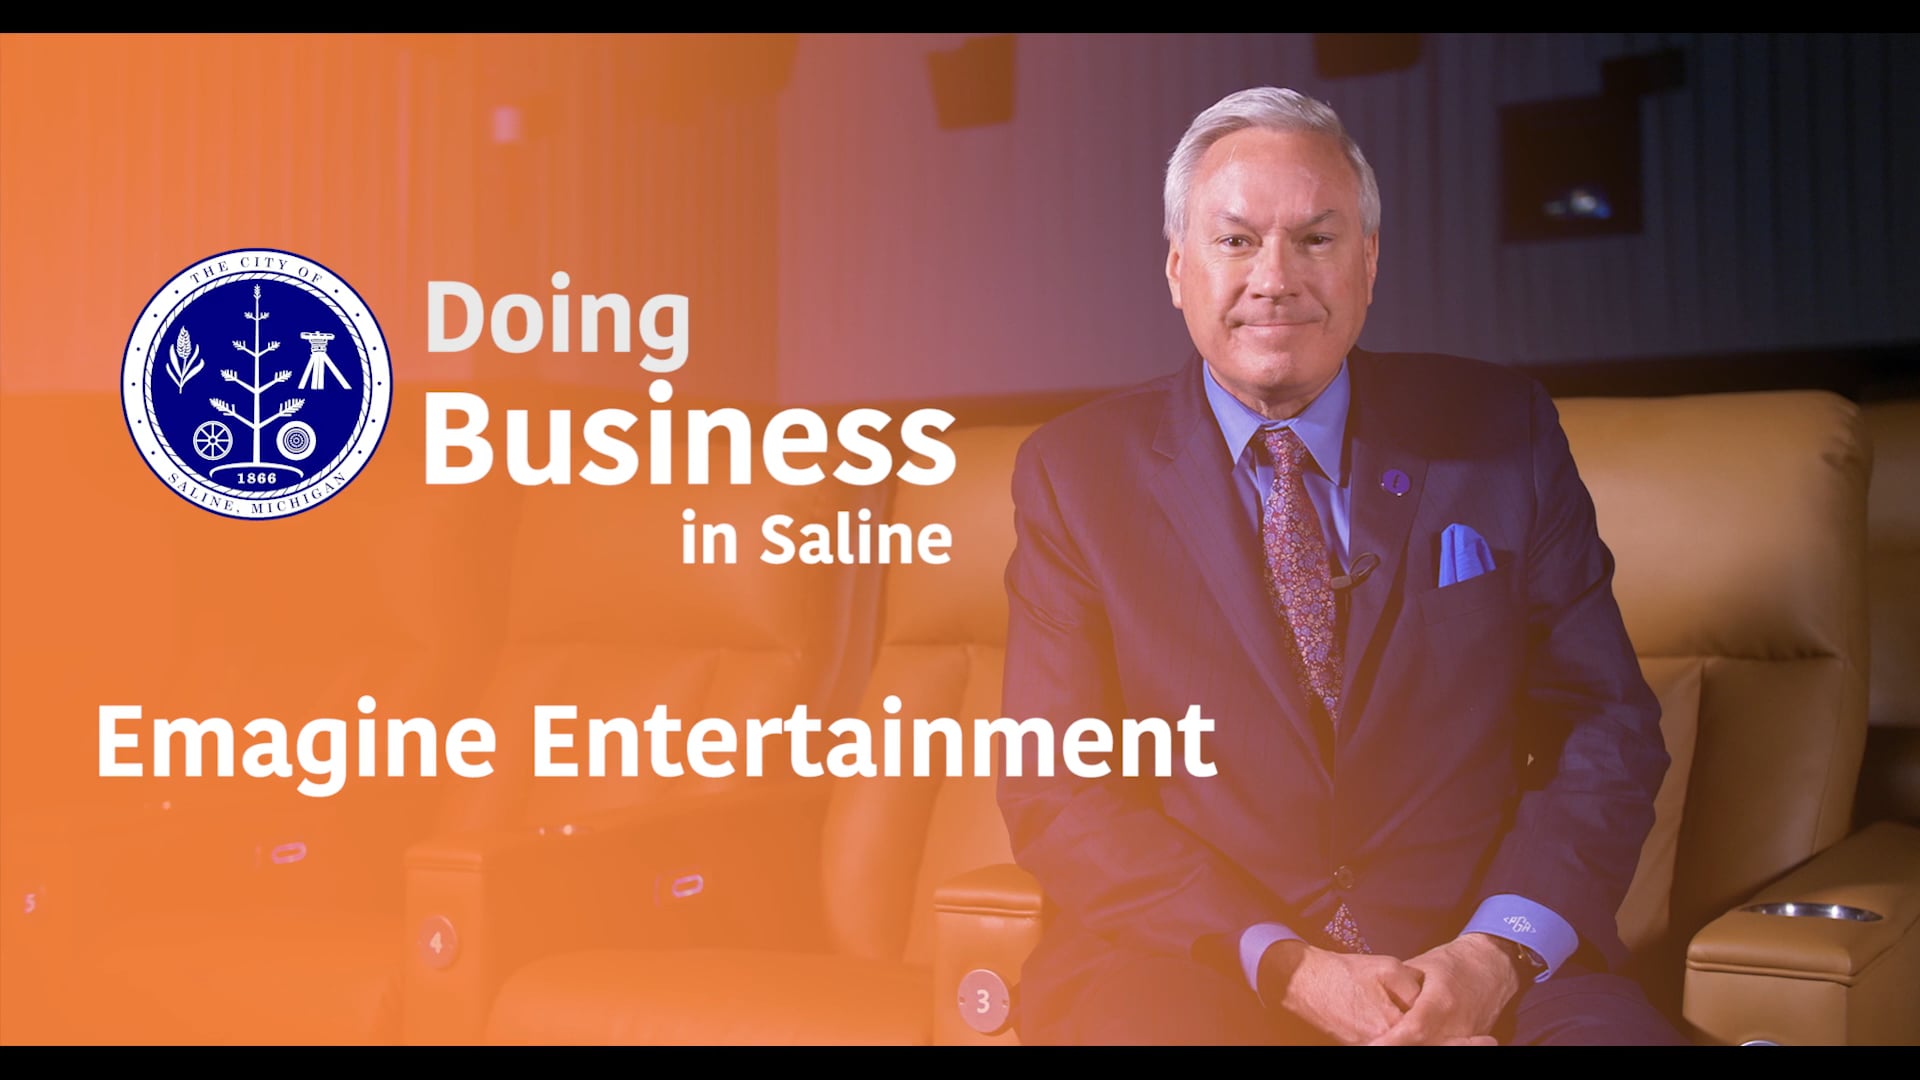 Doing Business in Saline - Emagine Entertainment